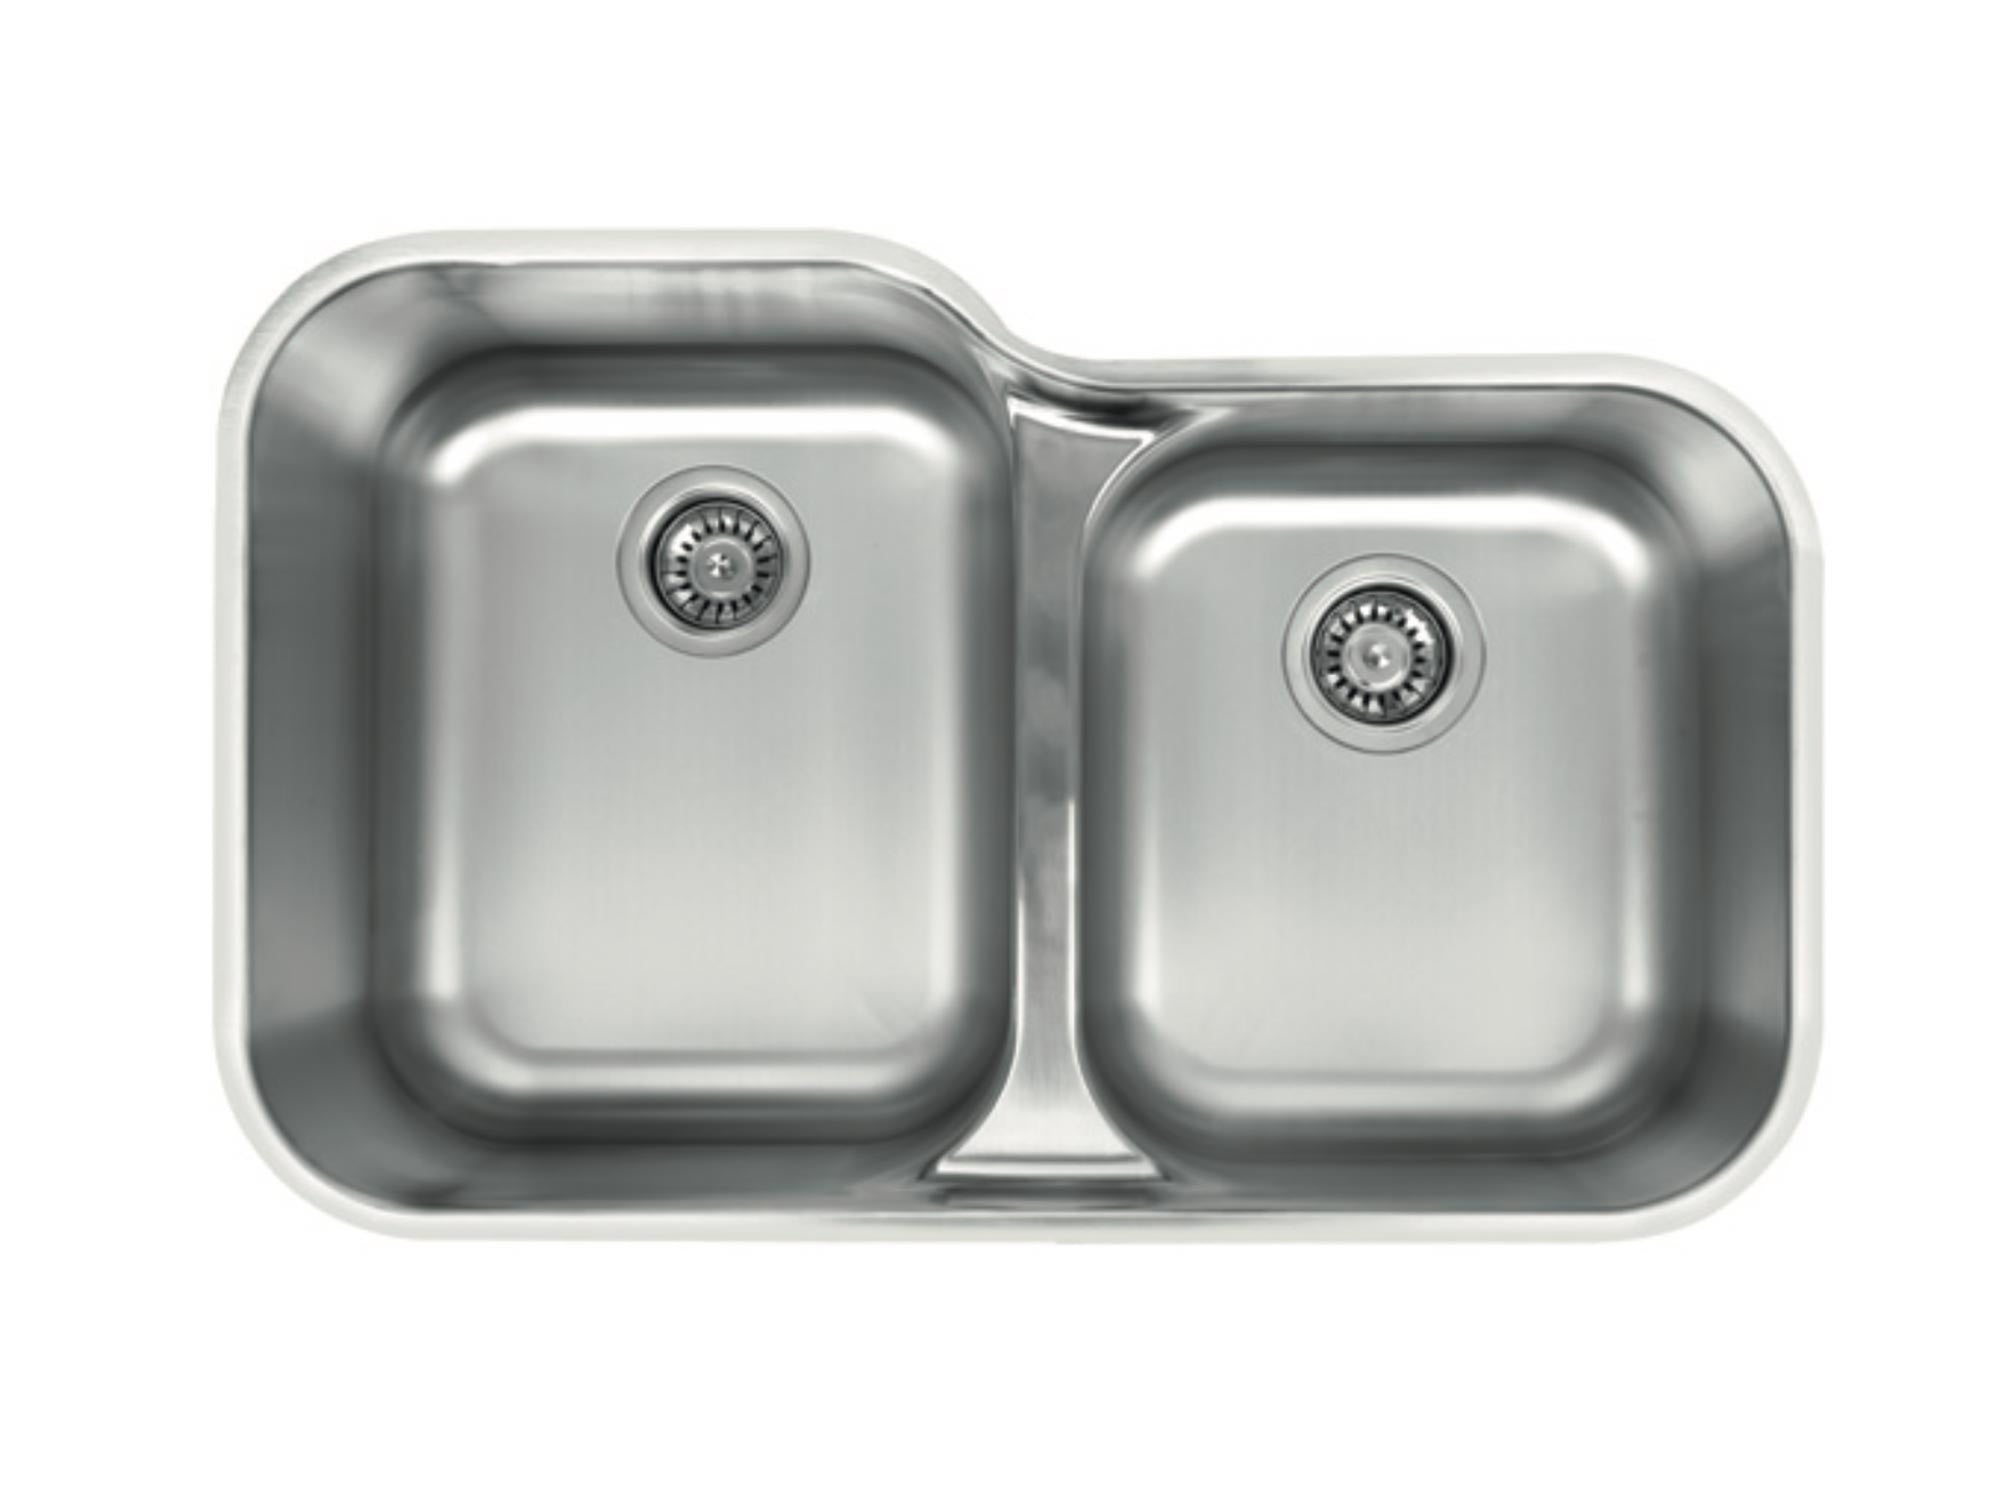 32 inch Stainless Steel Undermount Large Double 60/40 Low Divider Bowl Kitchen Sink - Classic 32L 60/40 - Sink Depot